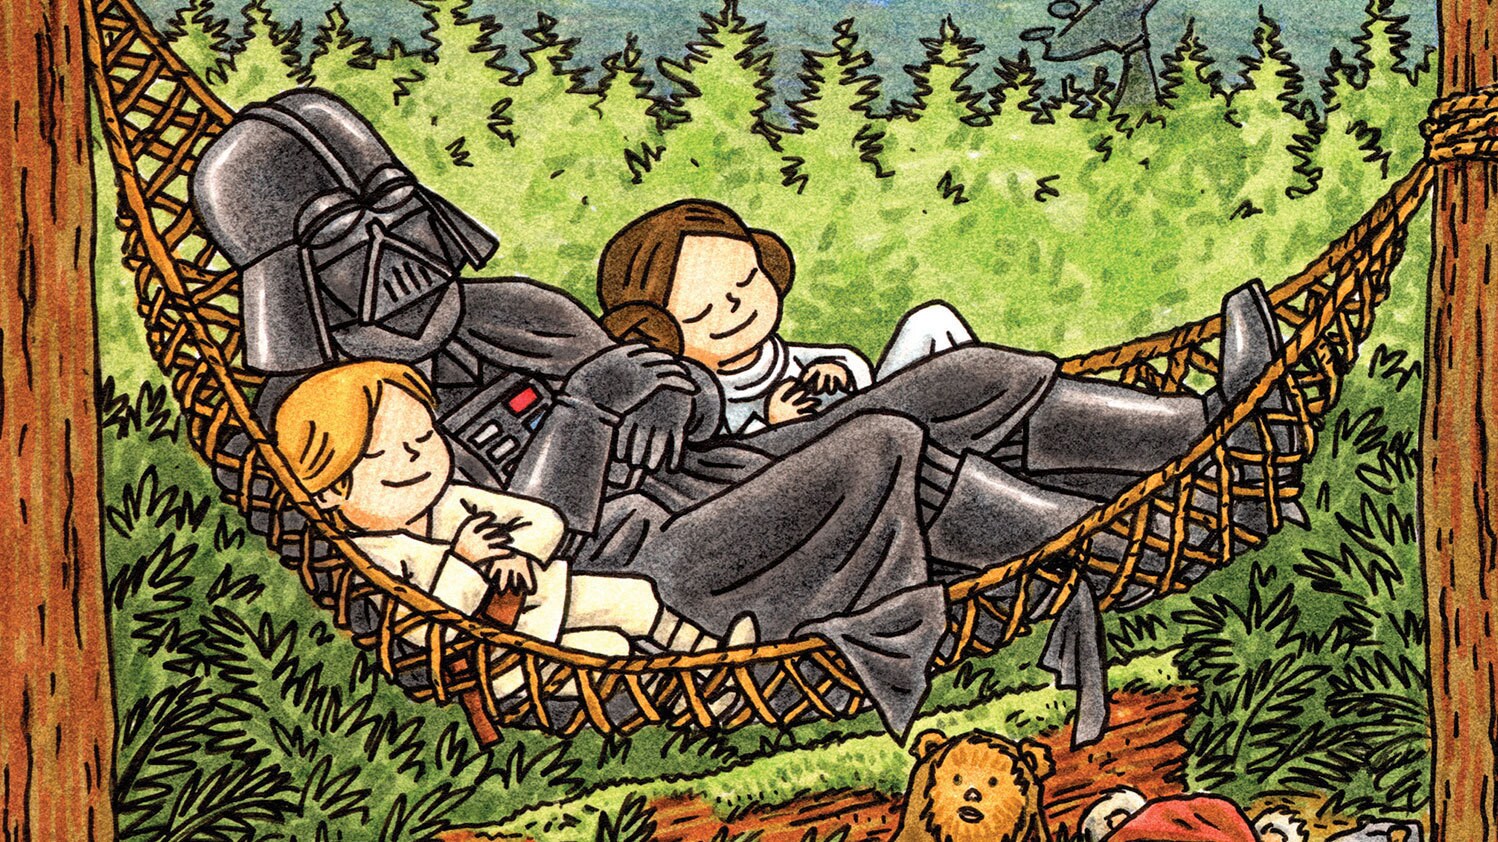 Making Darth Vader a Dad: Jeffrey Brown on His All-Ages Star Wars Books - Exclusive Print Reveal!